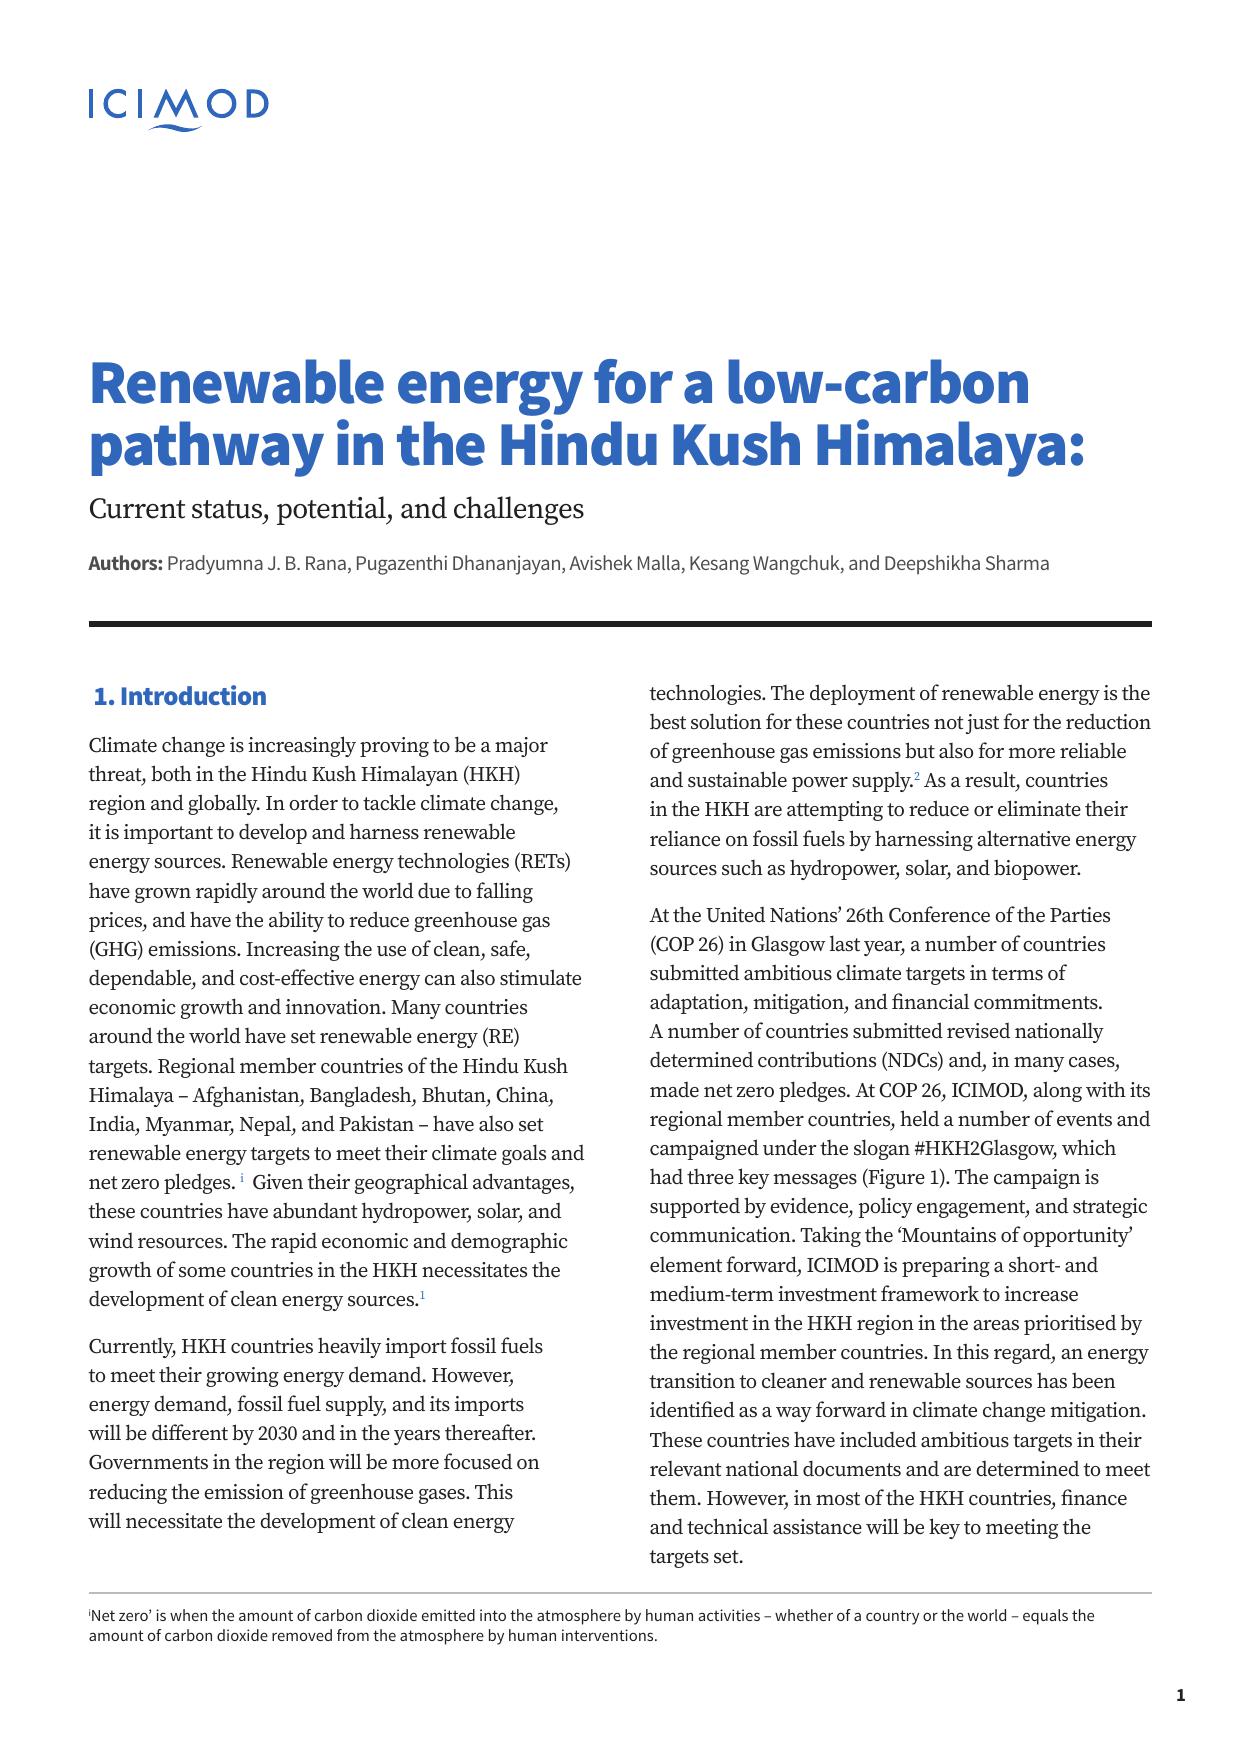 Renewable energy for a low-carbon pathway in the Hindu Kush Himalaya: Current status, potential, and challenges